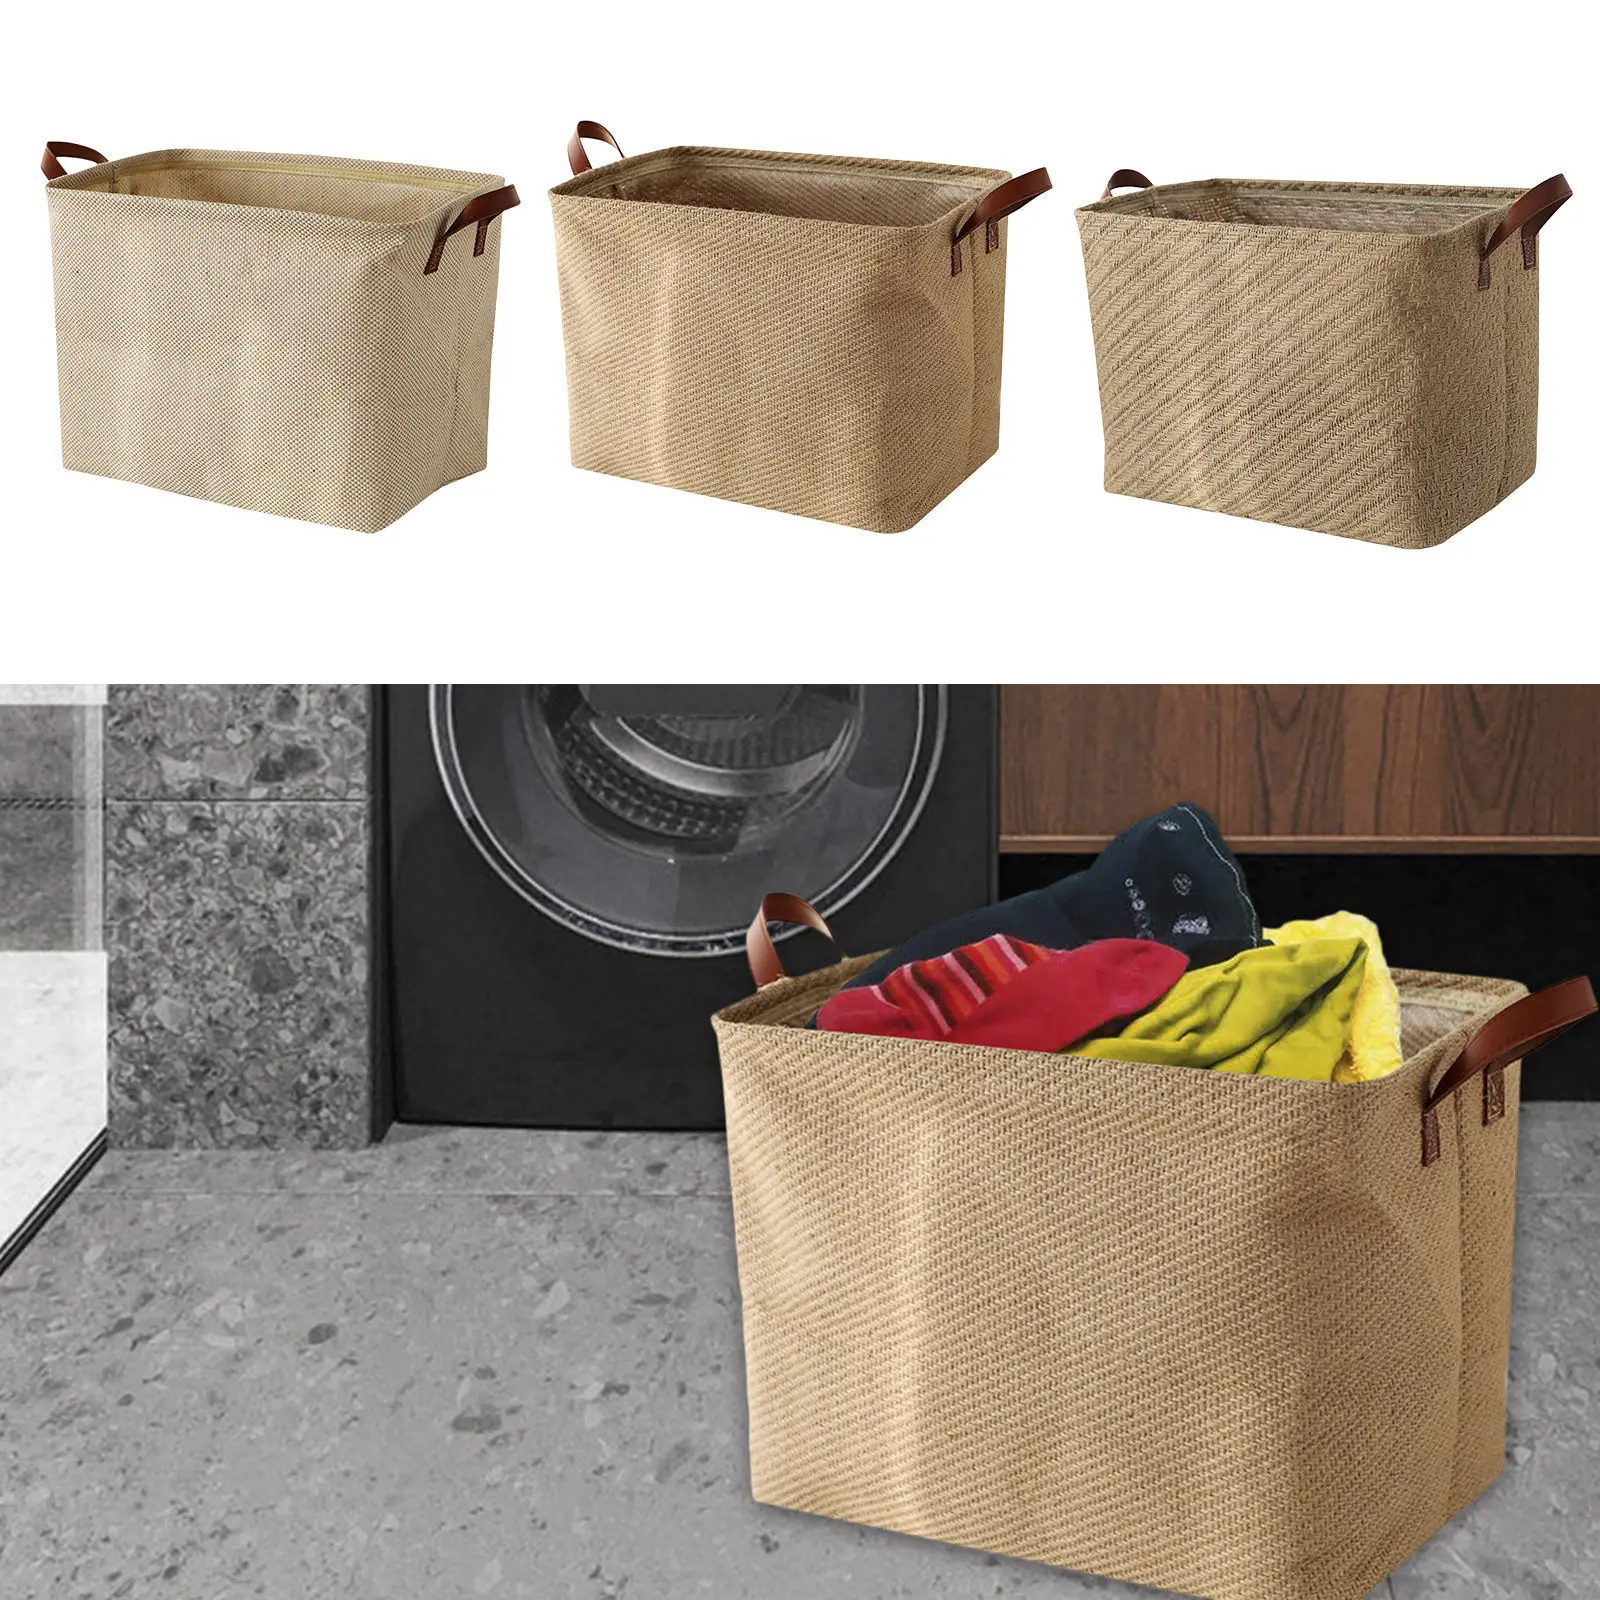 Foldable Storage Basket Decorative Dirty Clothes Organizer Basket with Handles for Home Dorm Office Closet Laundry Basket